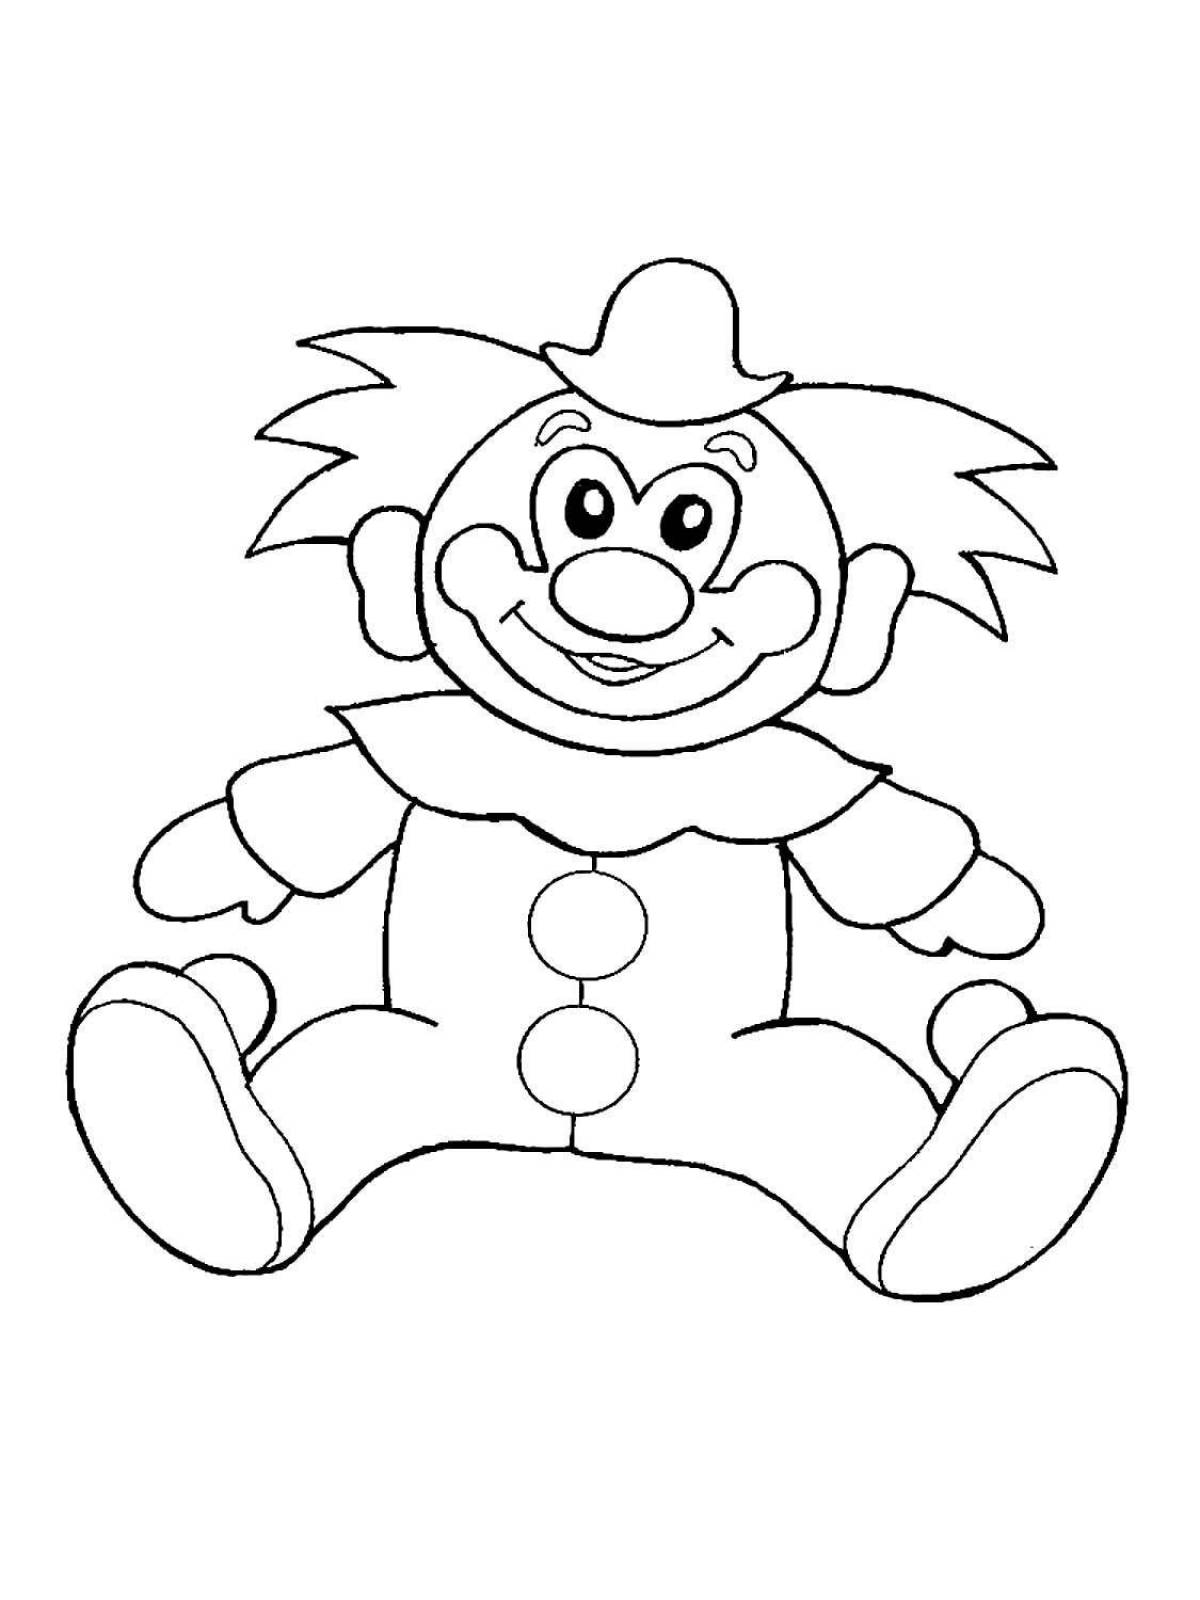 Gorgeous clown coloring book for preschoolers